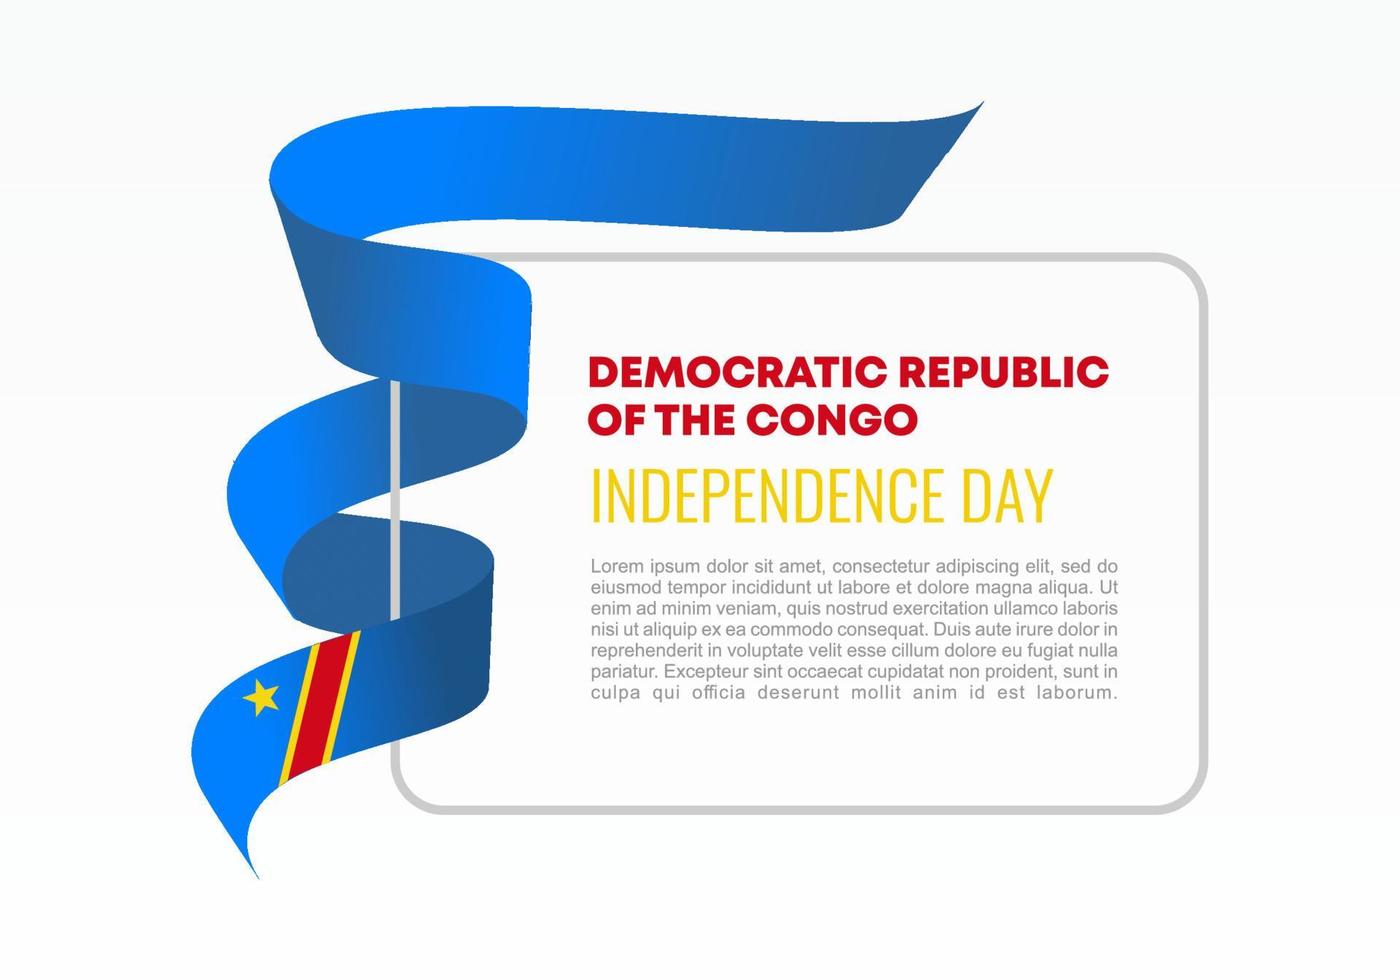 Republic of Congo independence day background for national celebration vector